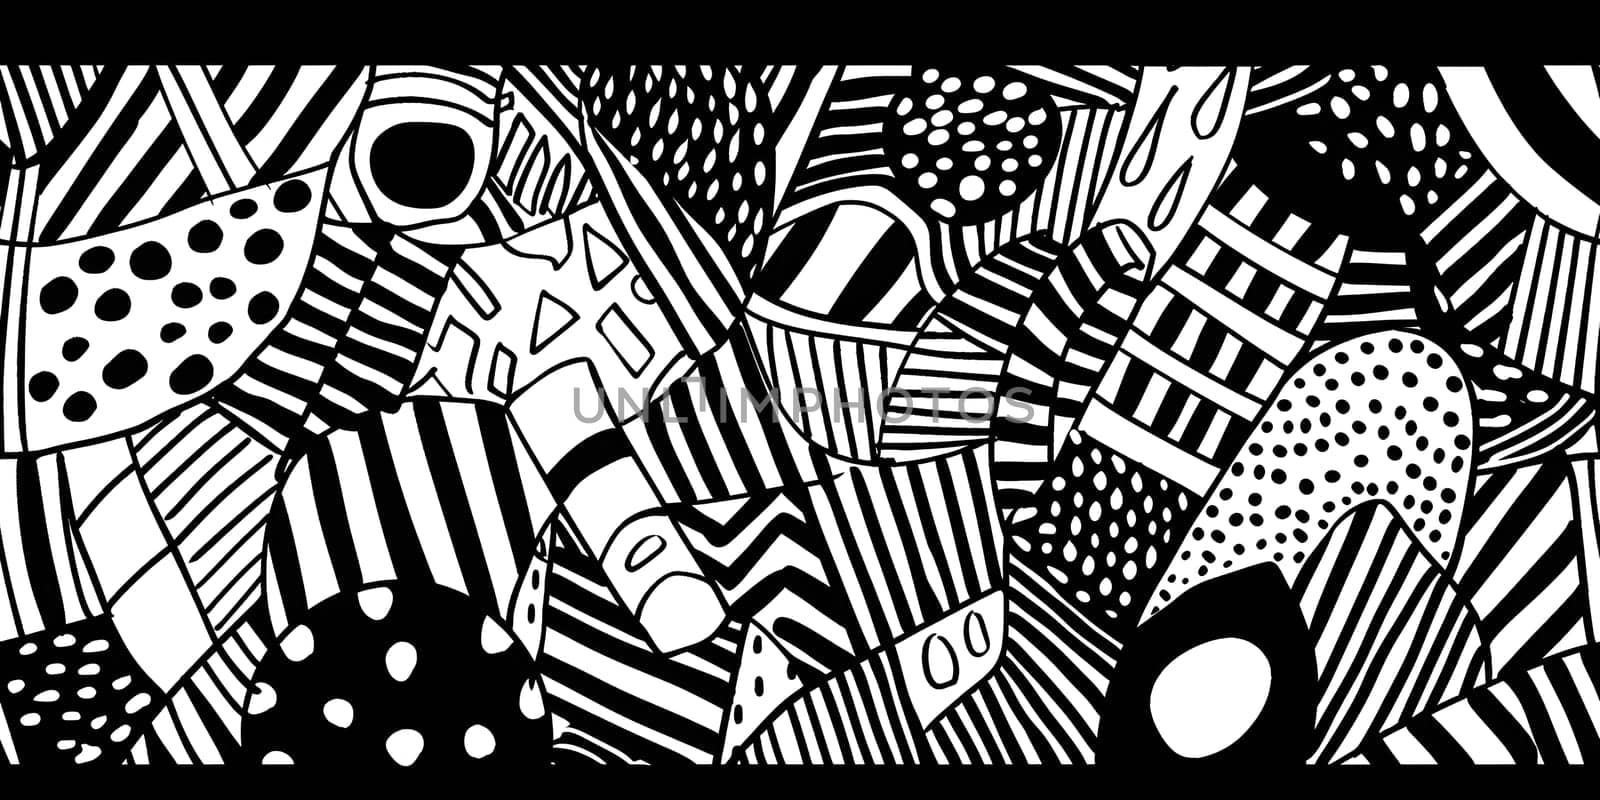 The blackandwhite illustration depicts a zebra in a symmetrical pattern, showcasing monochrome photography in urban design. The organism is depicted in a rectangle with a unique art style and font